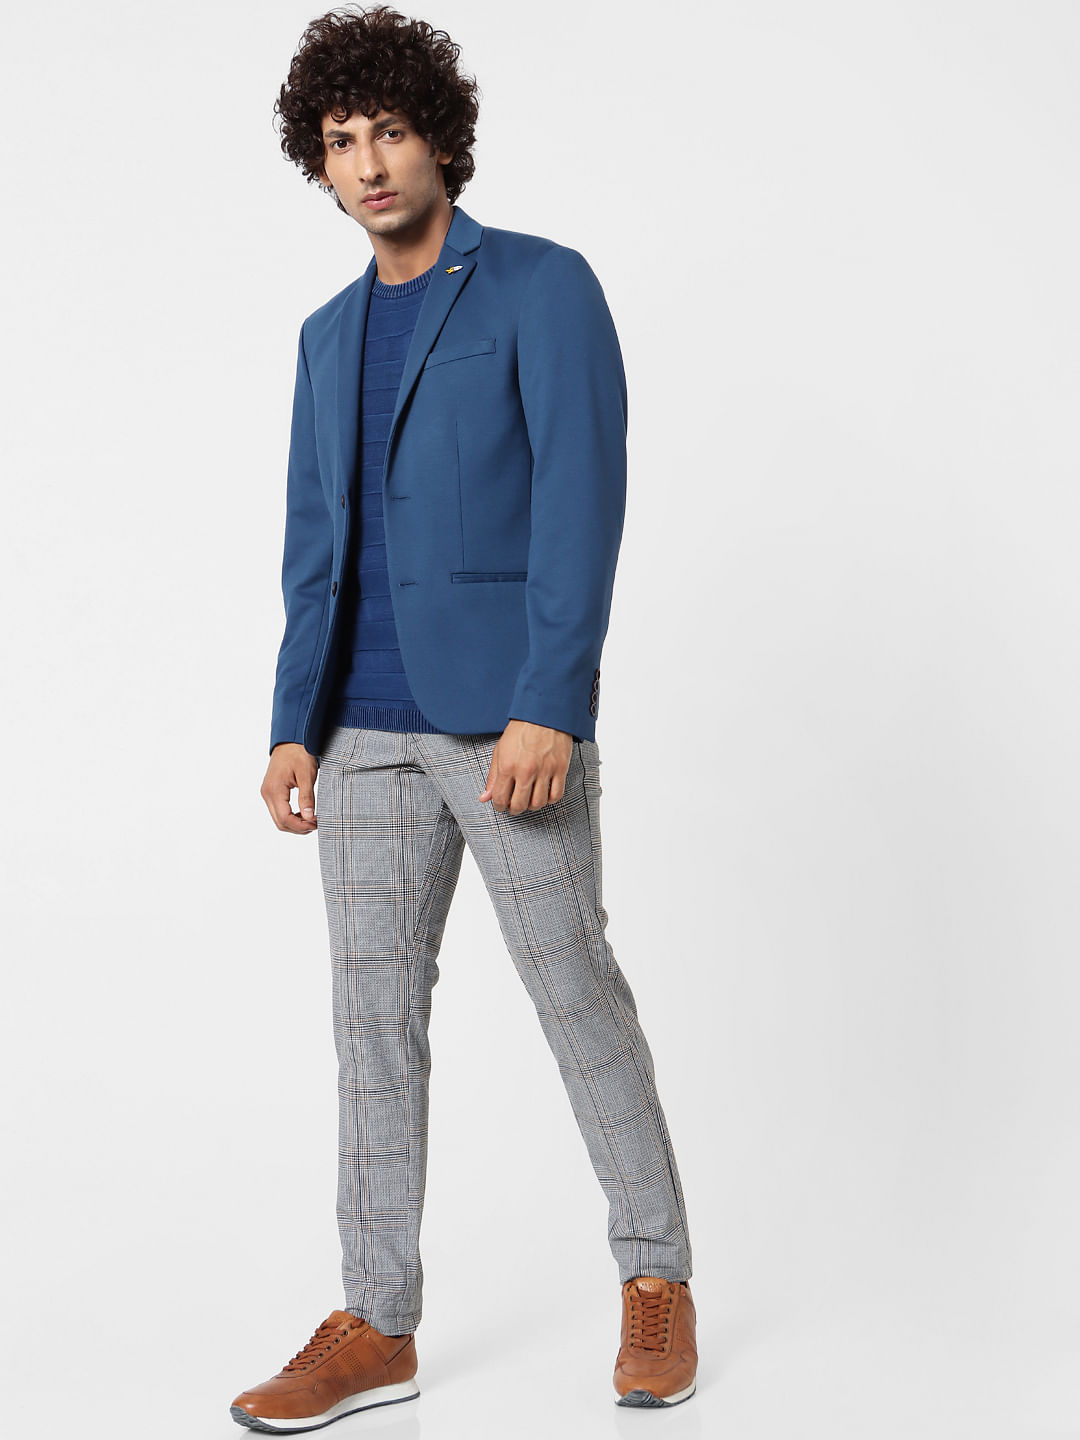 Checked Trousers  Buy Checked Trousers online in India